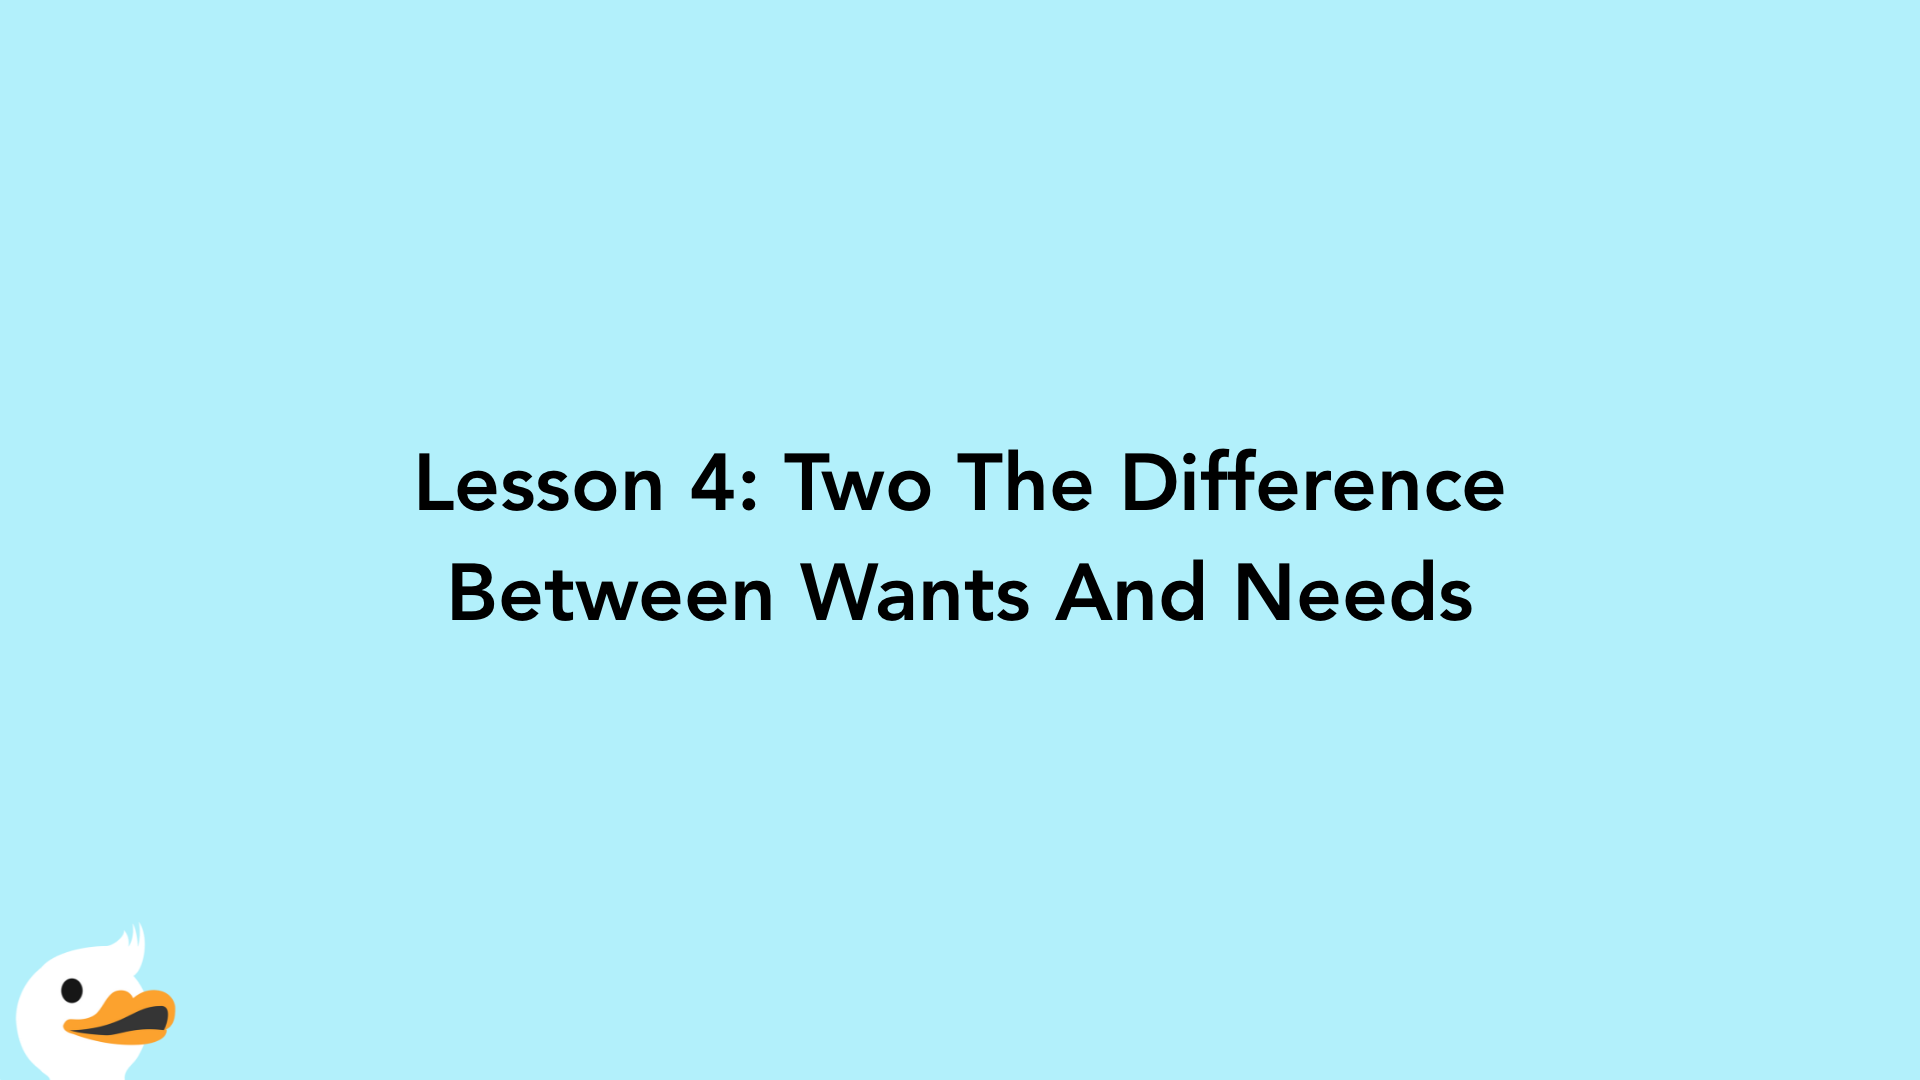 Lesson 4: Two The Difference Between Wants And Needs